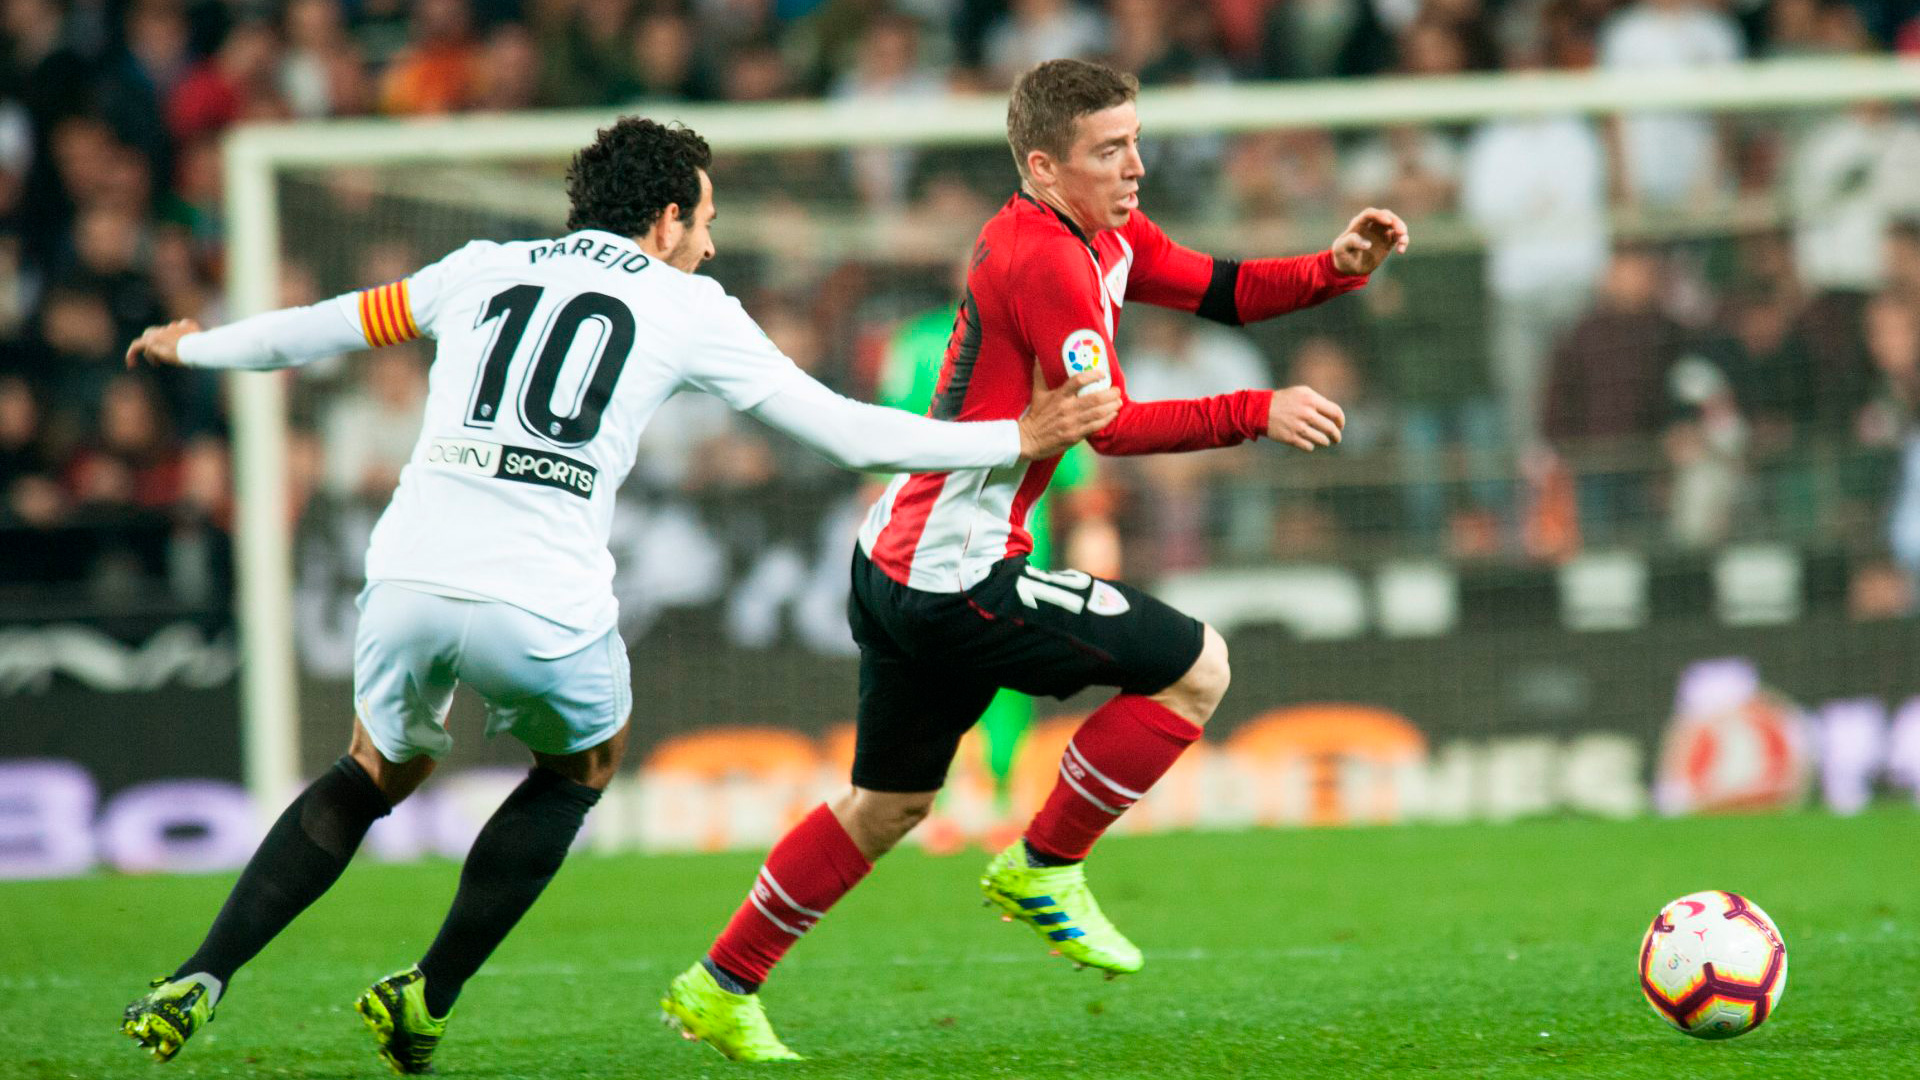 The most recent Valencia – Athletic